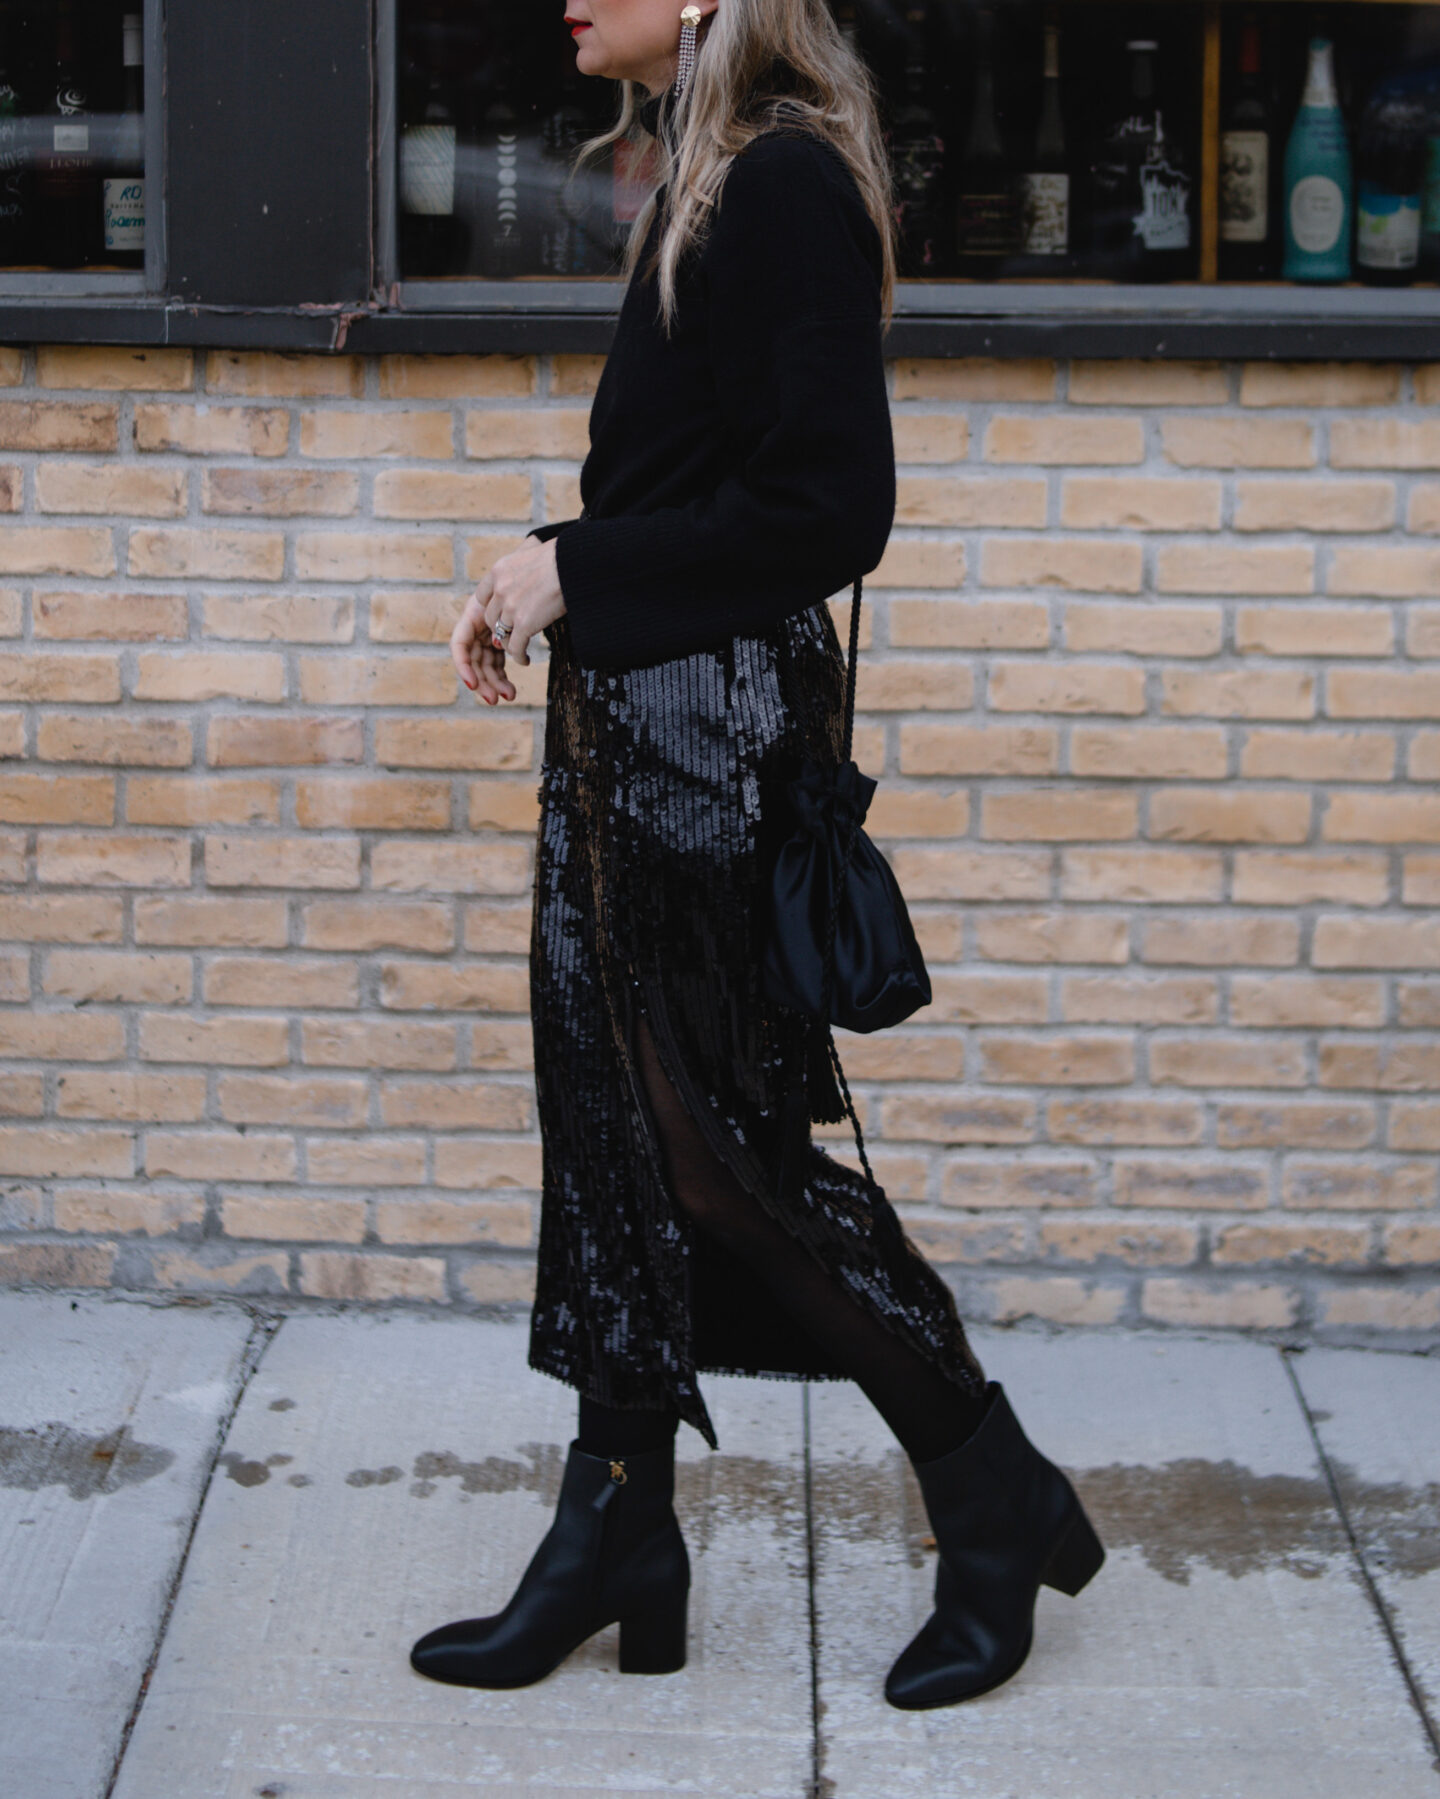 Karin Emily wears a black turtleneck sweater, sequin skirt, and black heeled booties with a pair of cat eye sunglasses